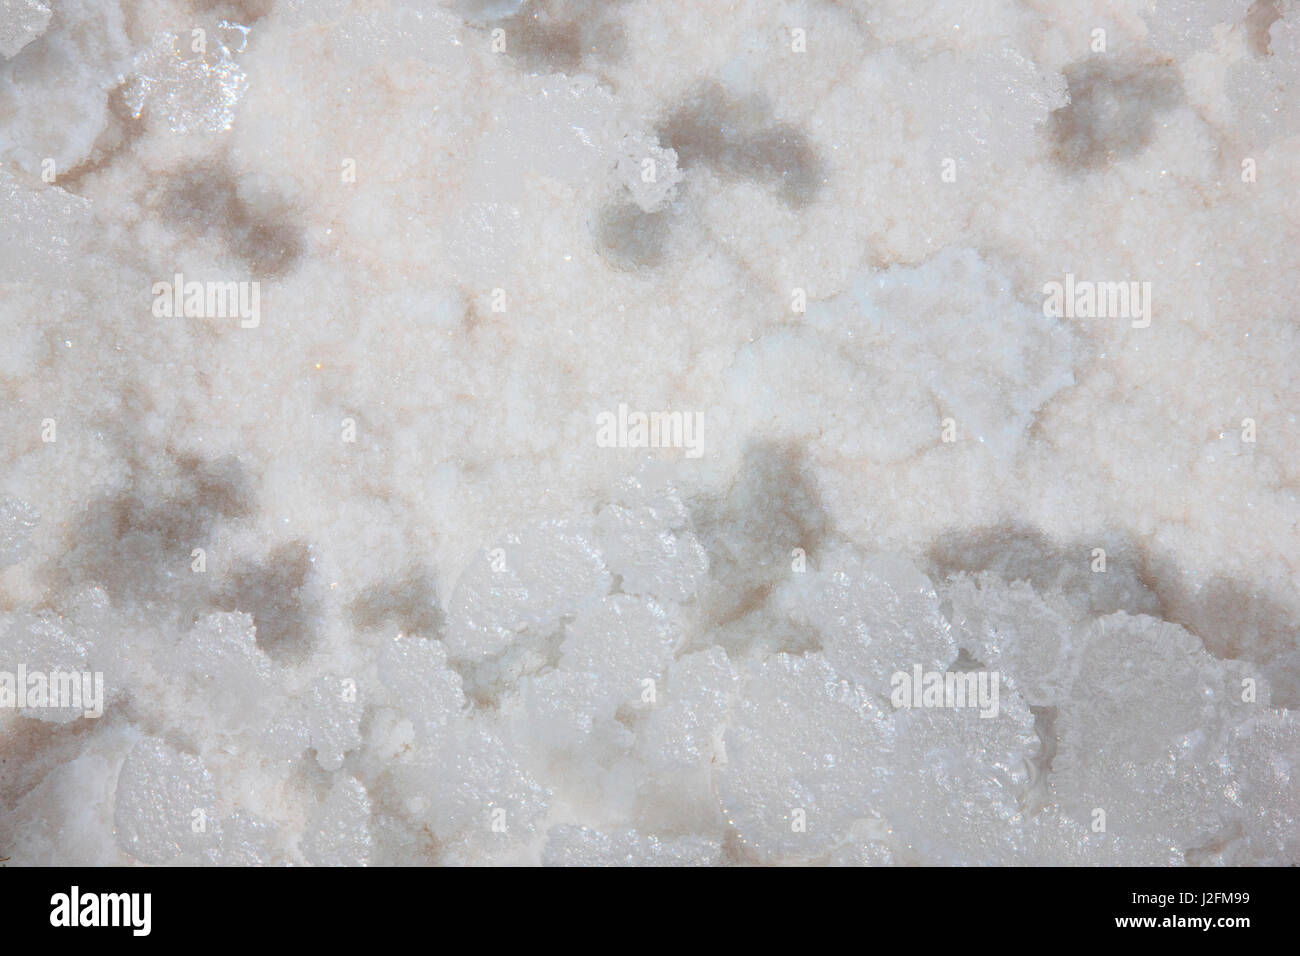 Ponds dug to grow salt crystals, one finds these crystals growing and floating in the water. Stock Photo